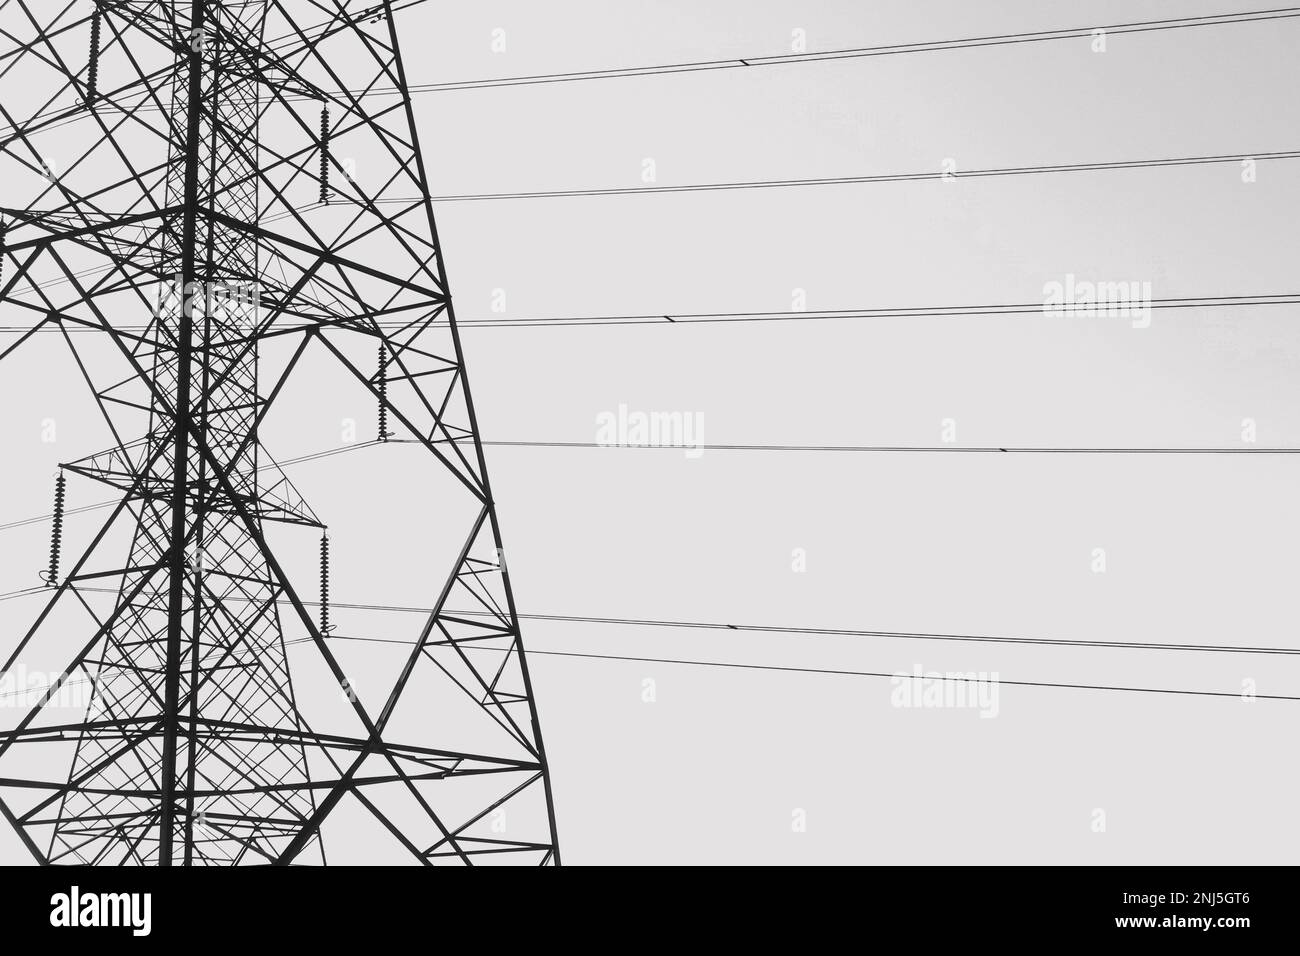 Overhead power line pylons and electrical cable wires sihouette. Black and white. Stock Photo